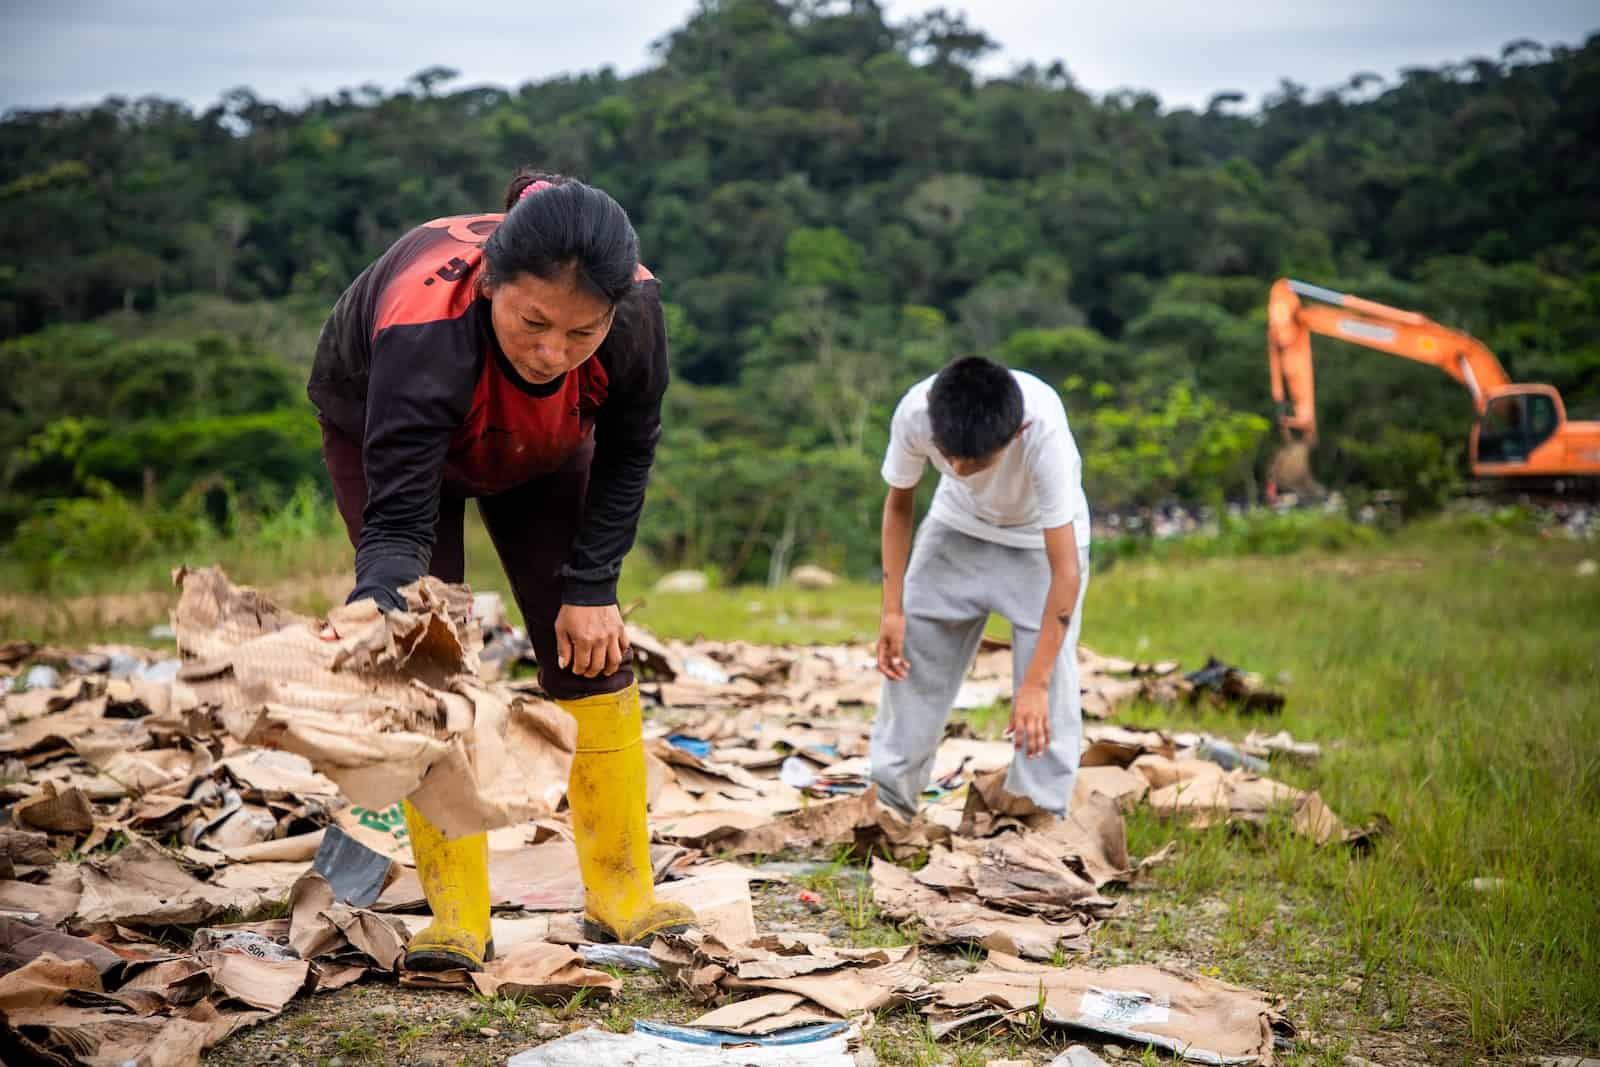 A woman and boy lean over a landfill, sorting cardboard.